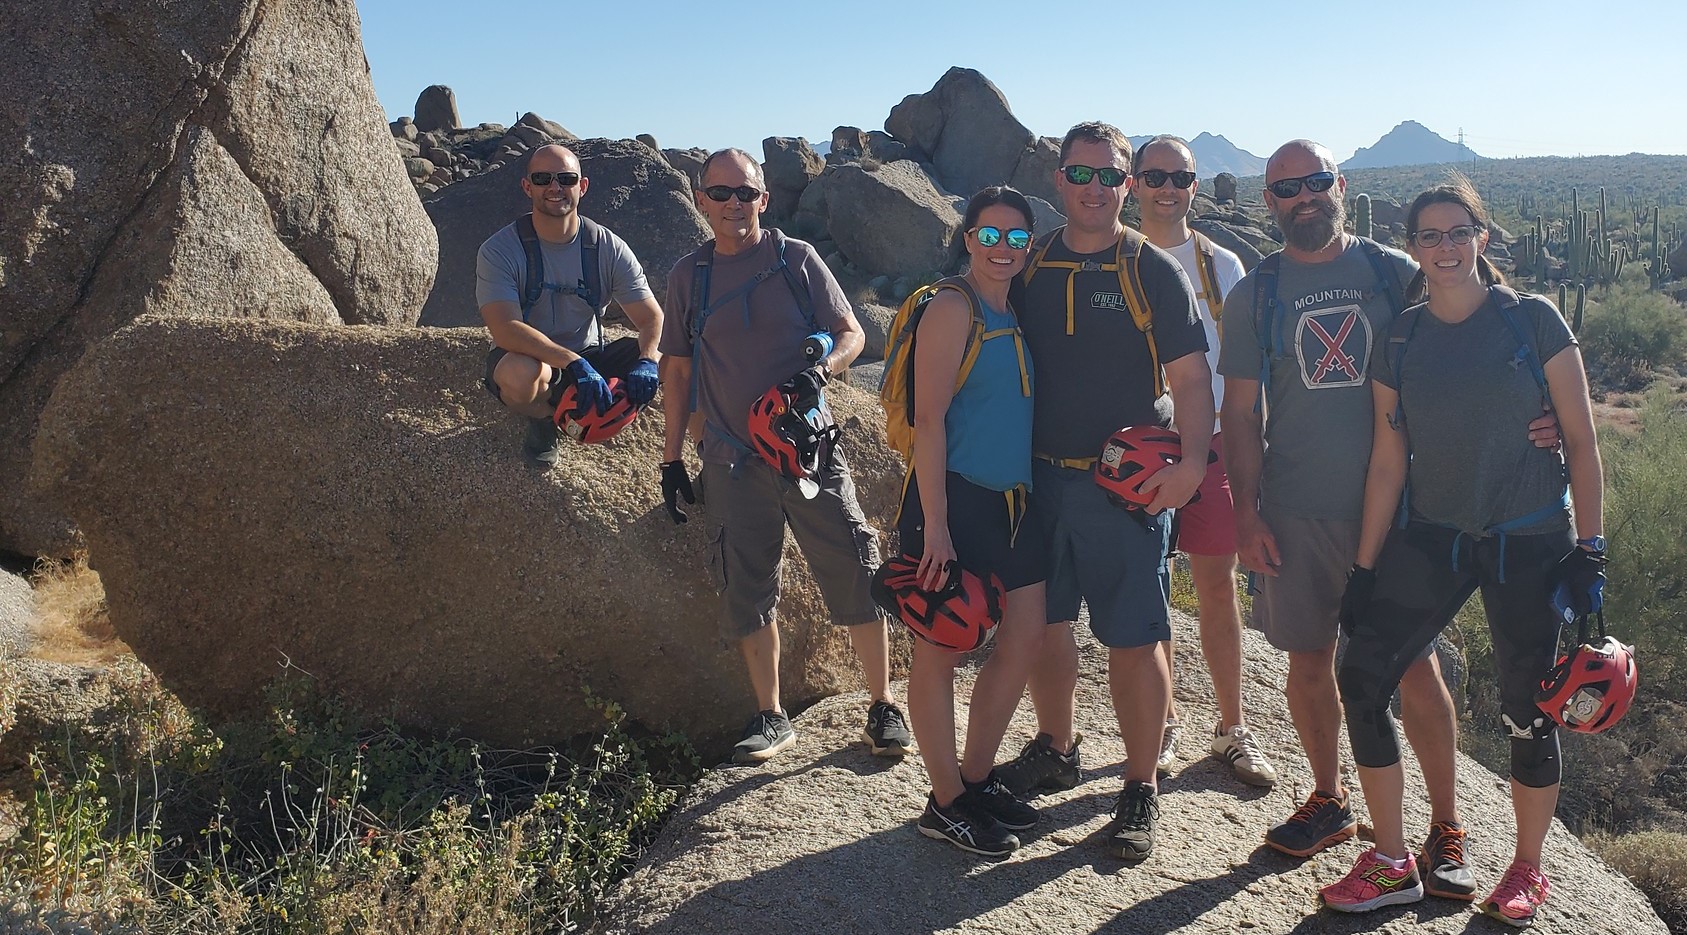 A Phoenix mountain biking group from the Wild Bunch Desert Guides pauses during an adventure tour to take a photo at an iconic Sonoran Desert rock formation.